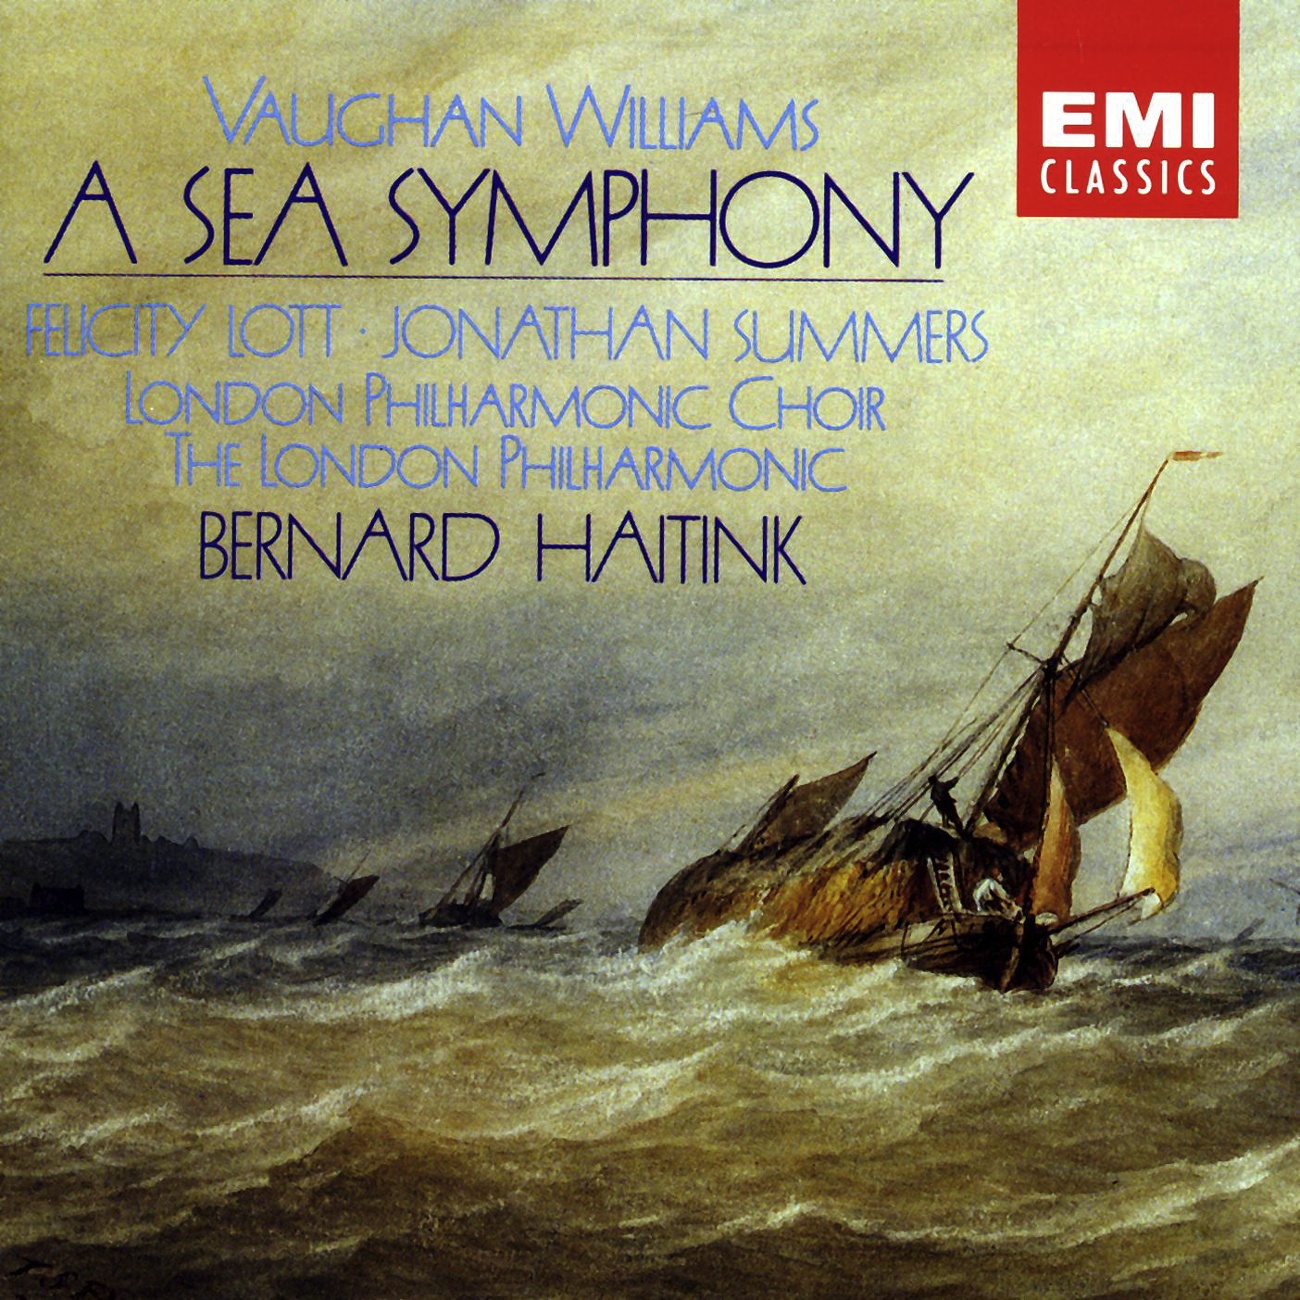 Vaughan Williams: A Sea Symphony: IV. The Explorers, Down From The Gardens Of Asia Descending